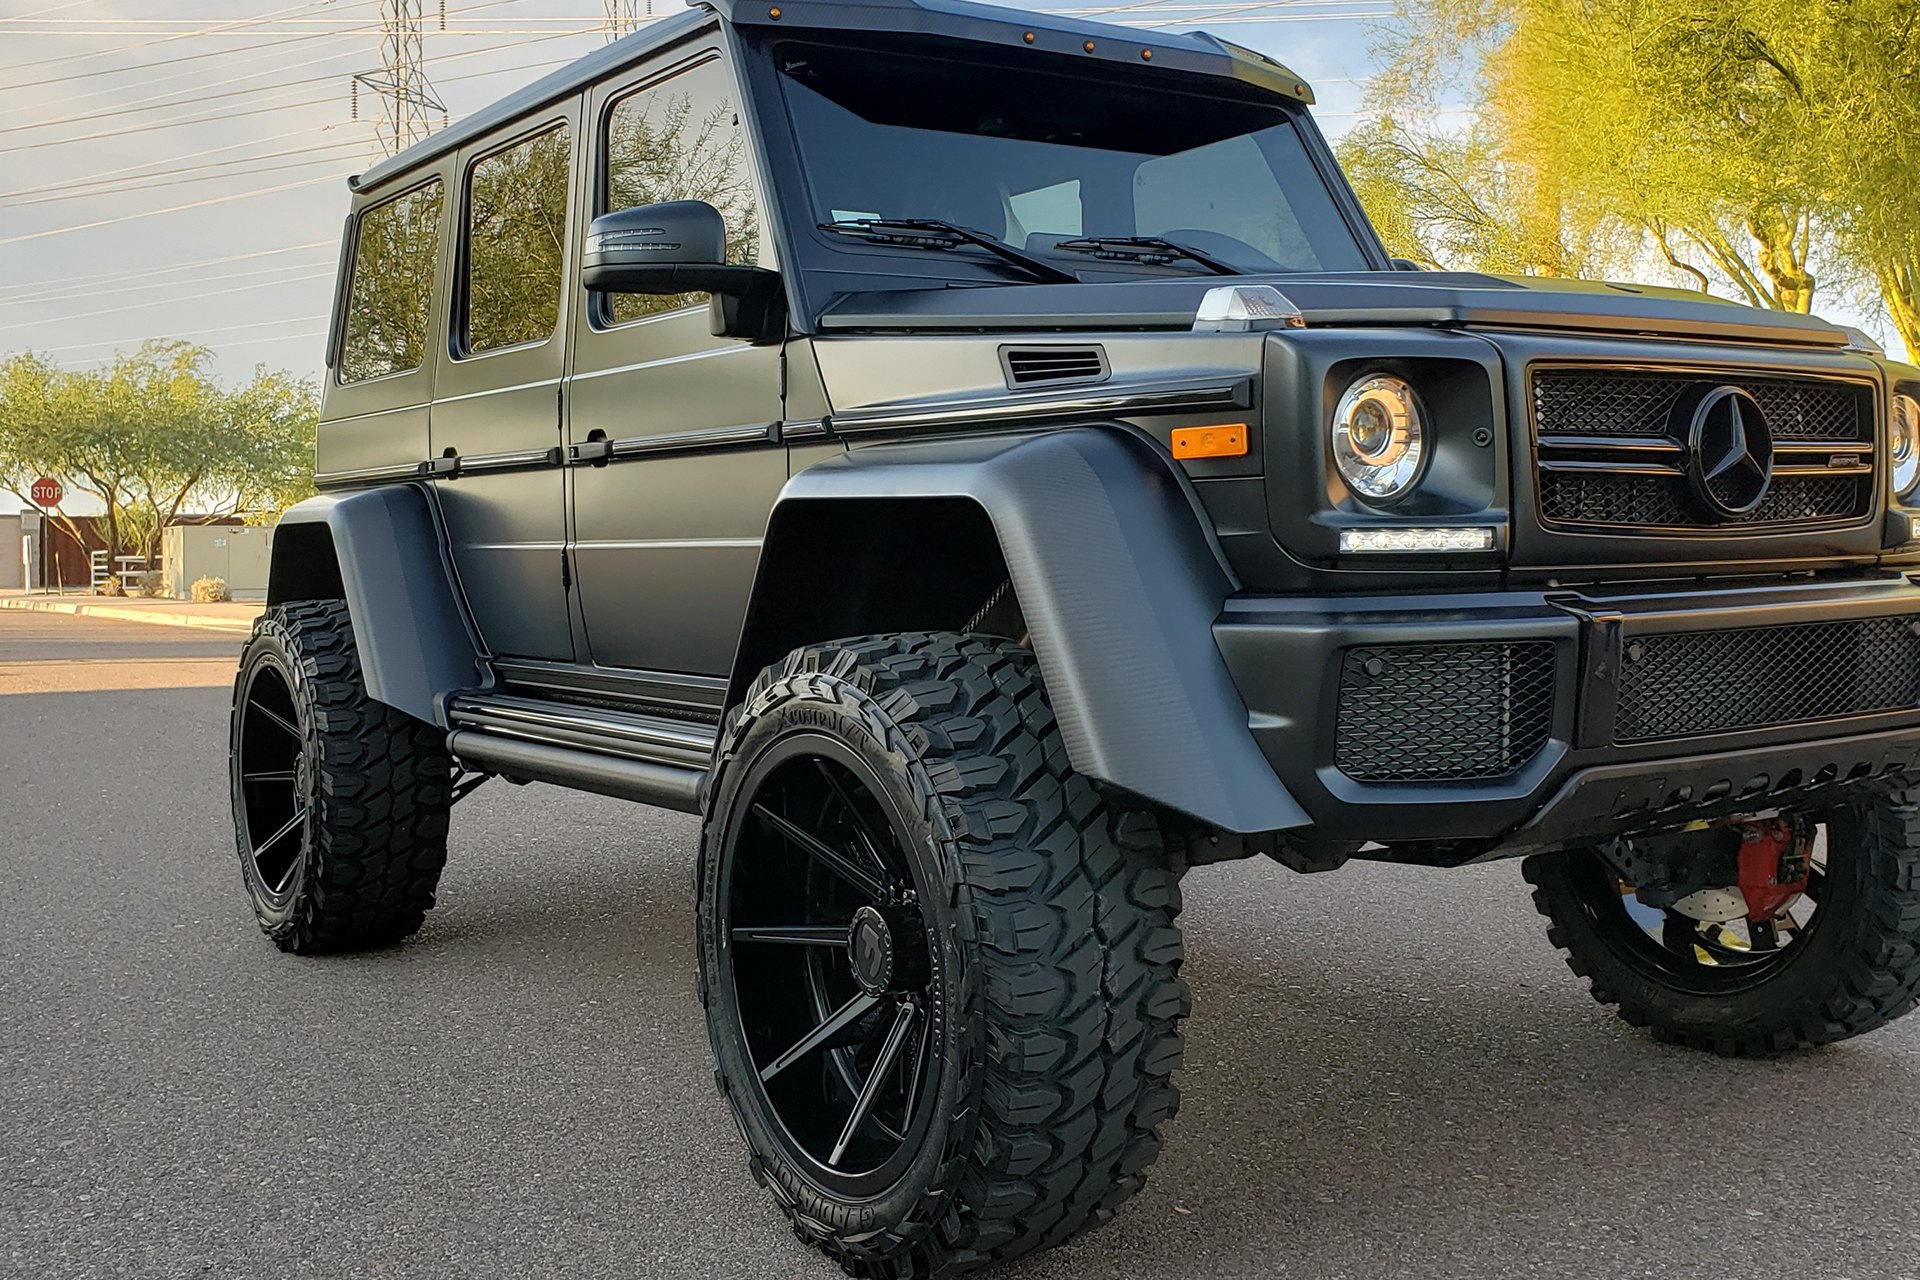 Lifted Mercedes G Class Goes In Style Wearing Matte Black Exterior Parts Carid Com Gallery